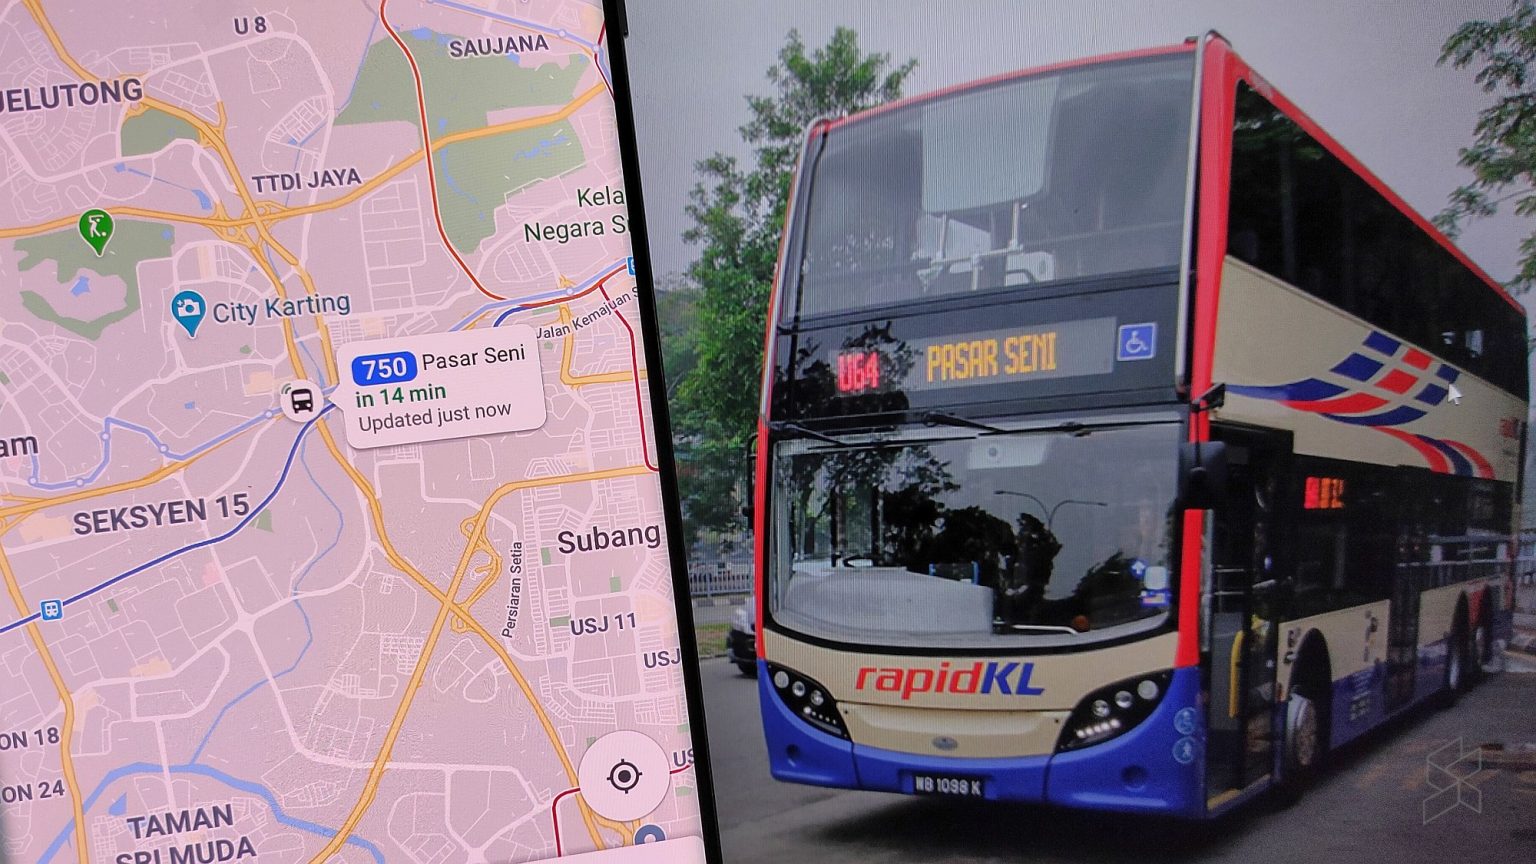 Google Maps Can Help You Check Real Time Locations Of Rapid Kl Buses